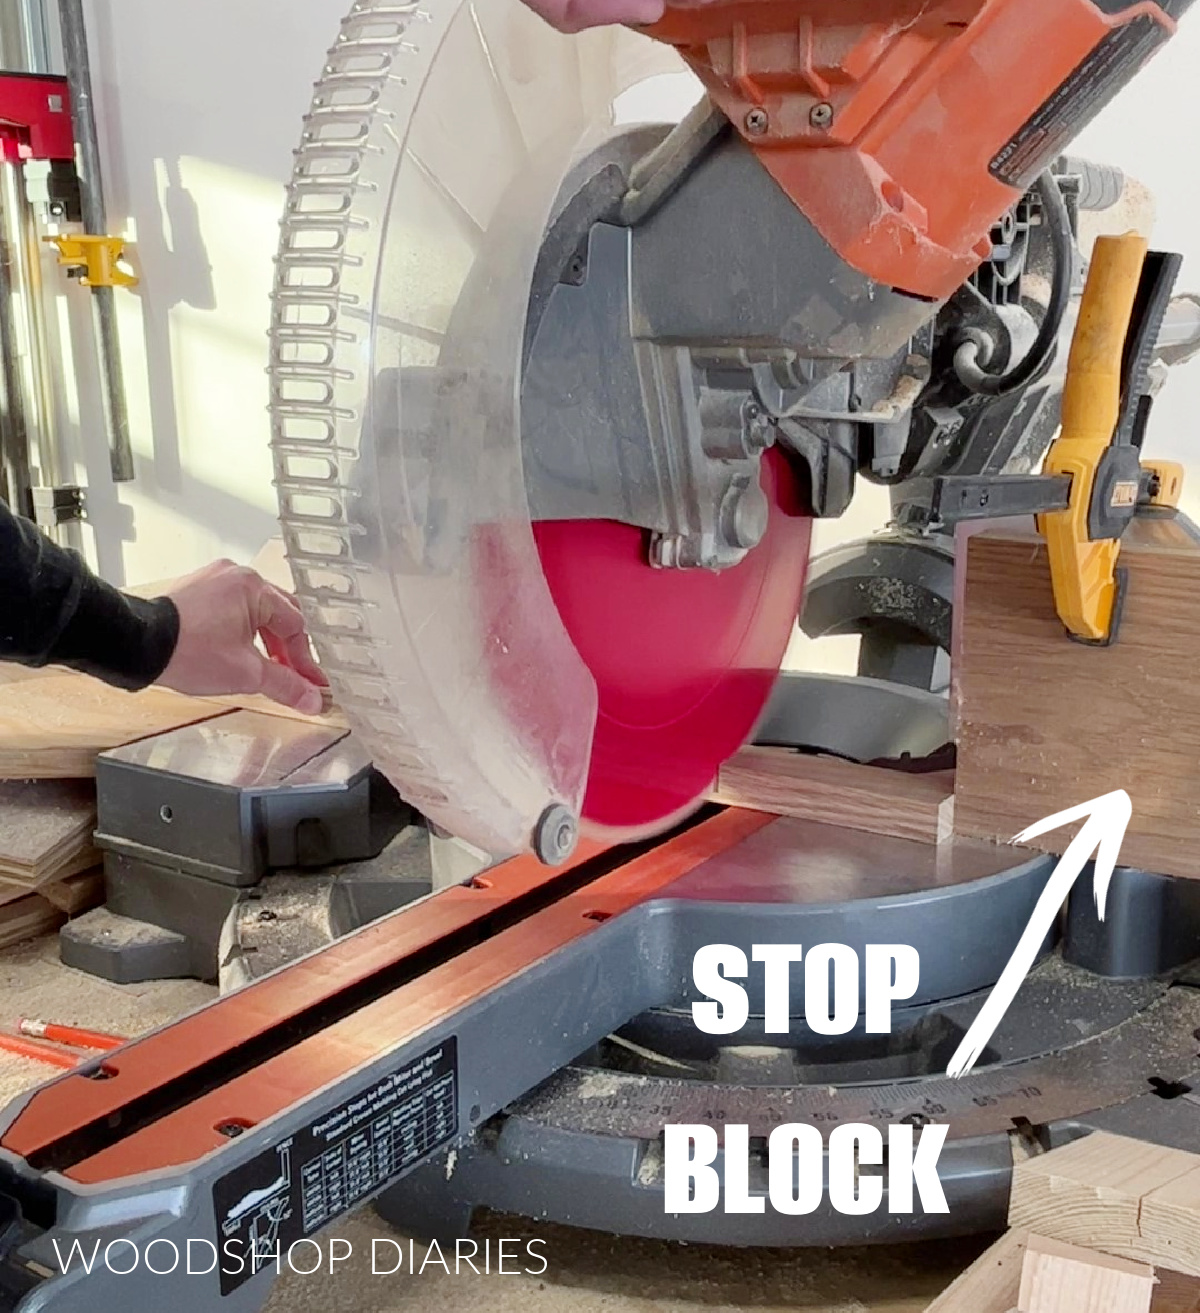 Stop block clamped to miter saw for consistent length cuts